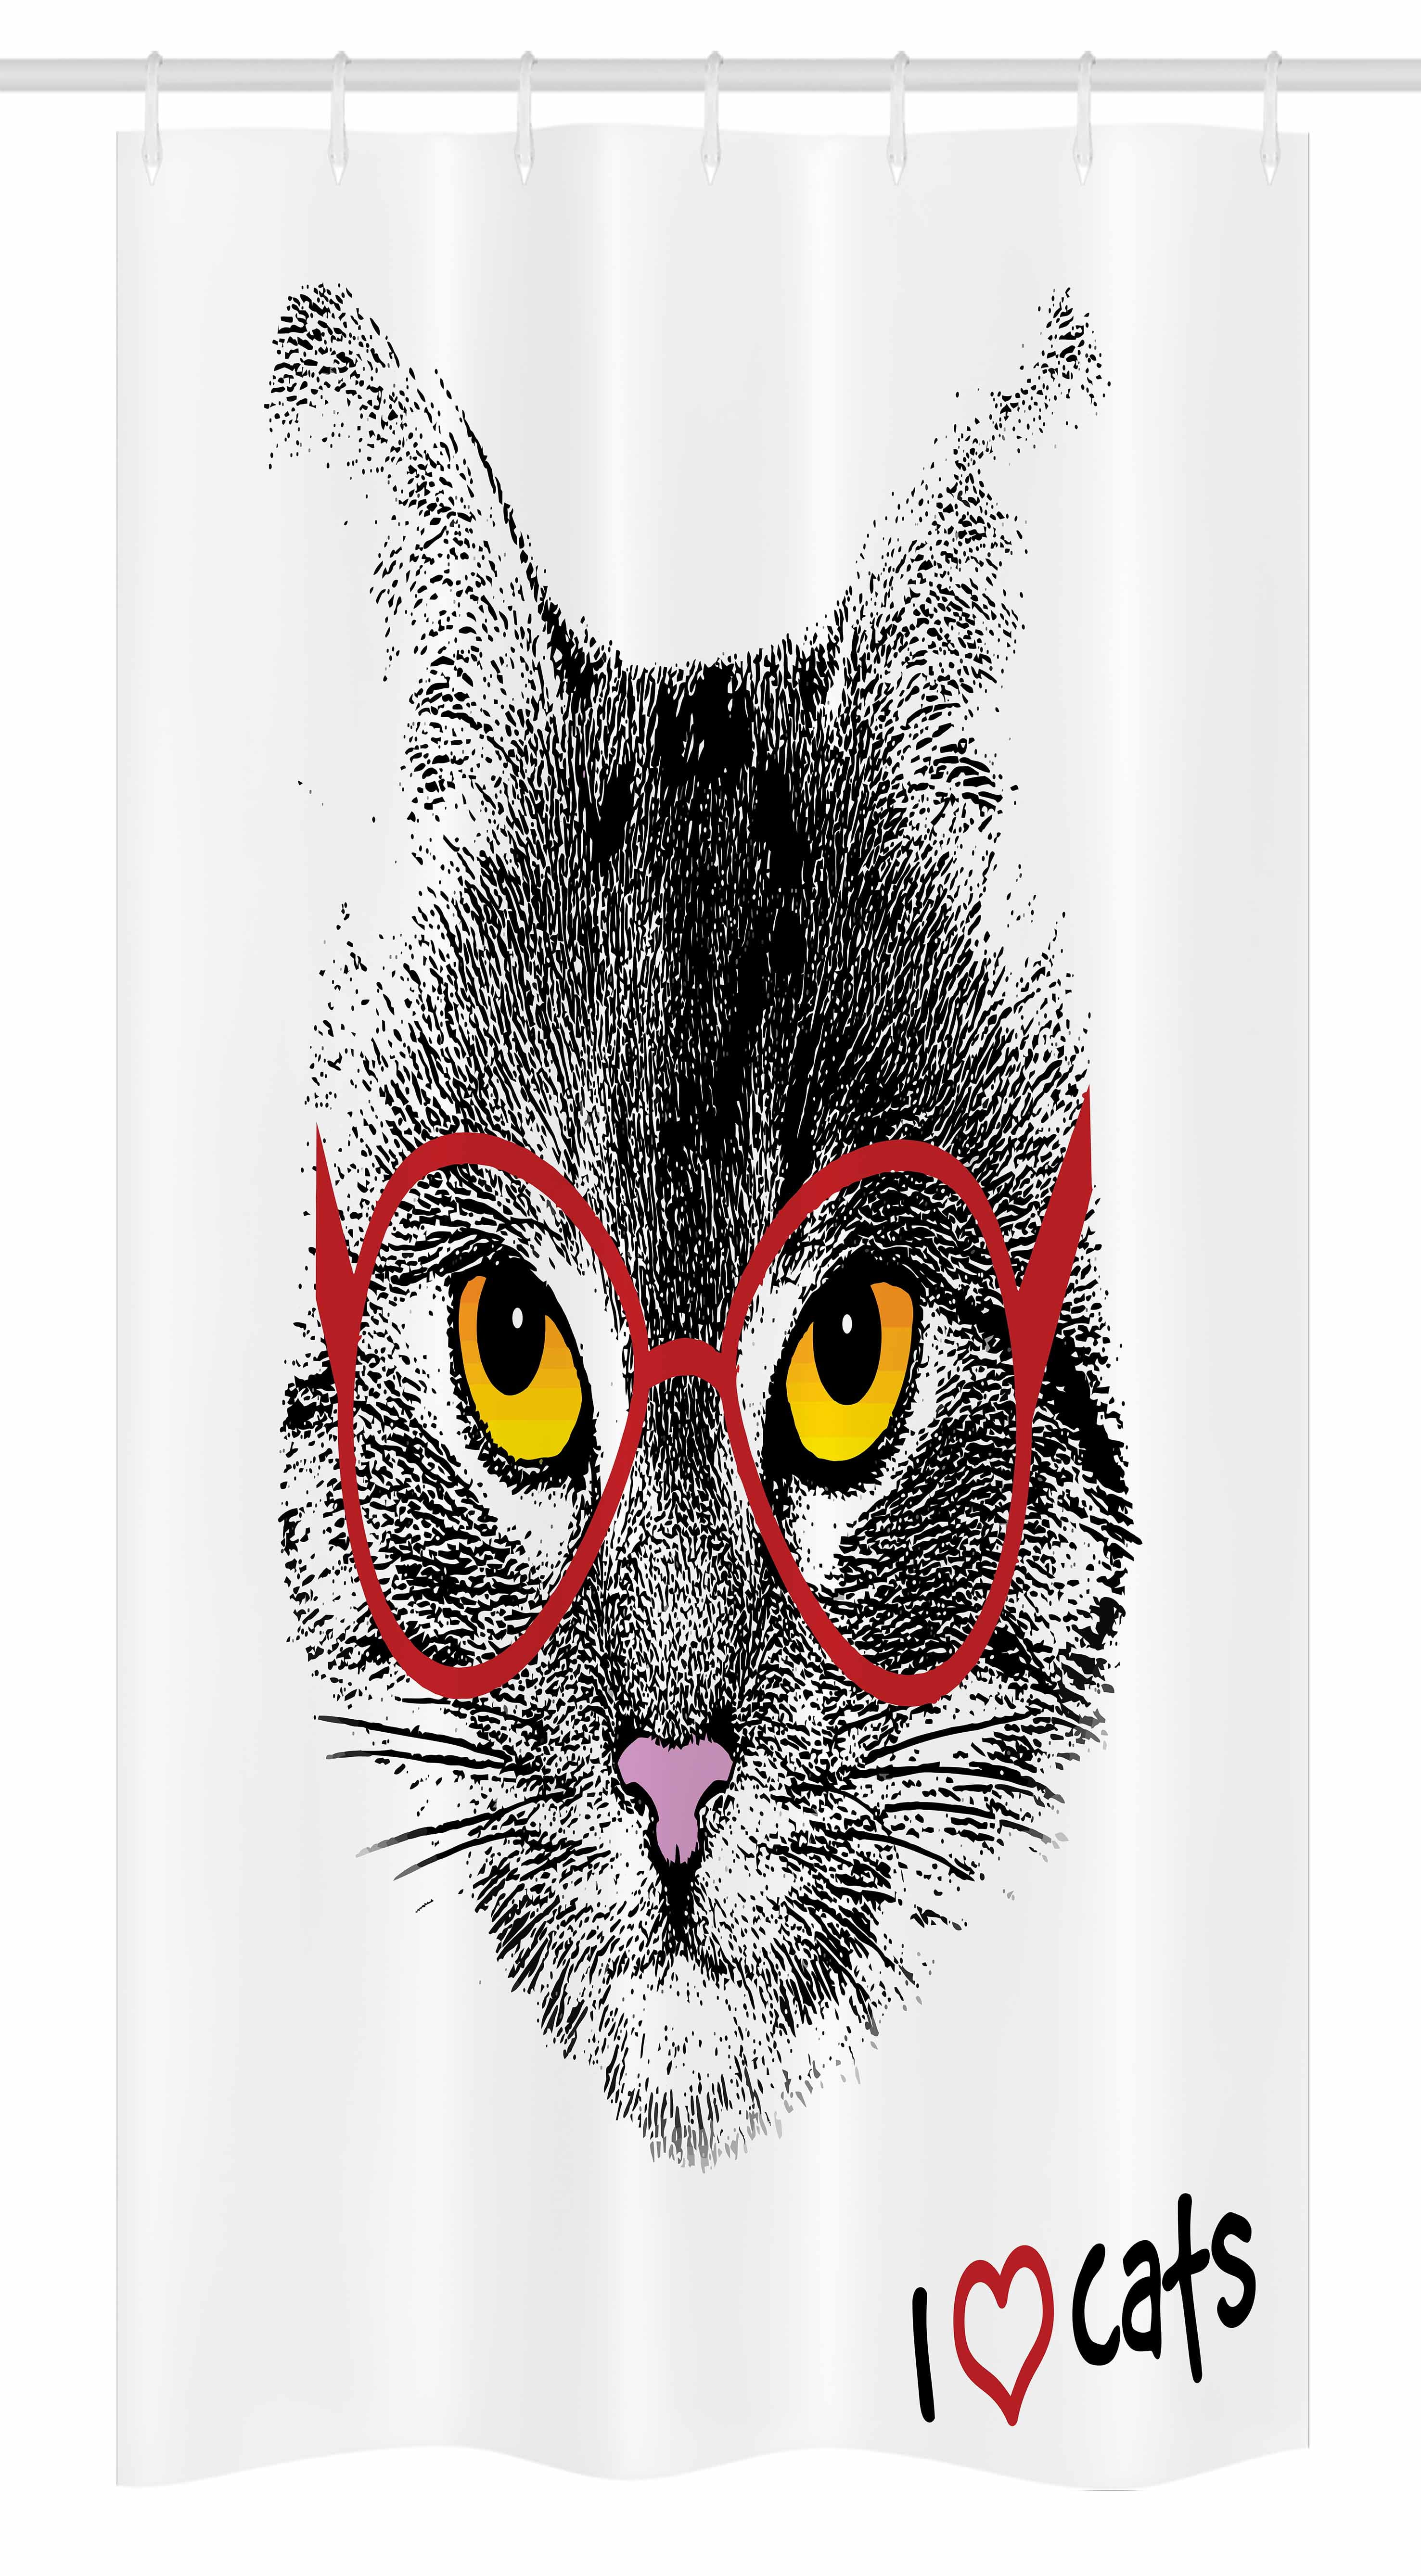 Cat Stall Shower Curtain Wise Nerd Cat With Glasses Judging The World Humor Digital Style Art